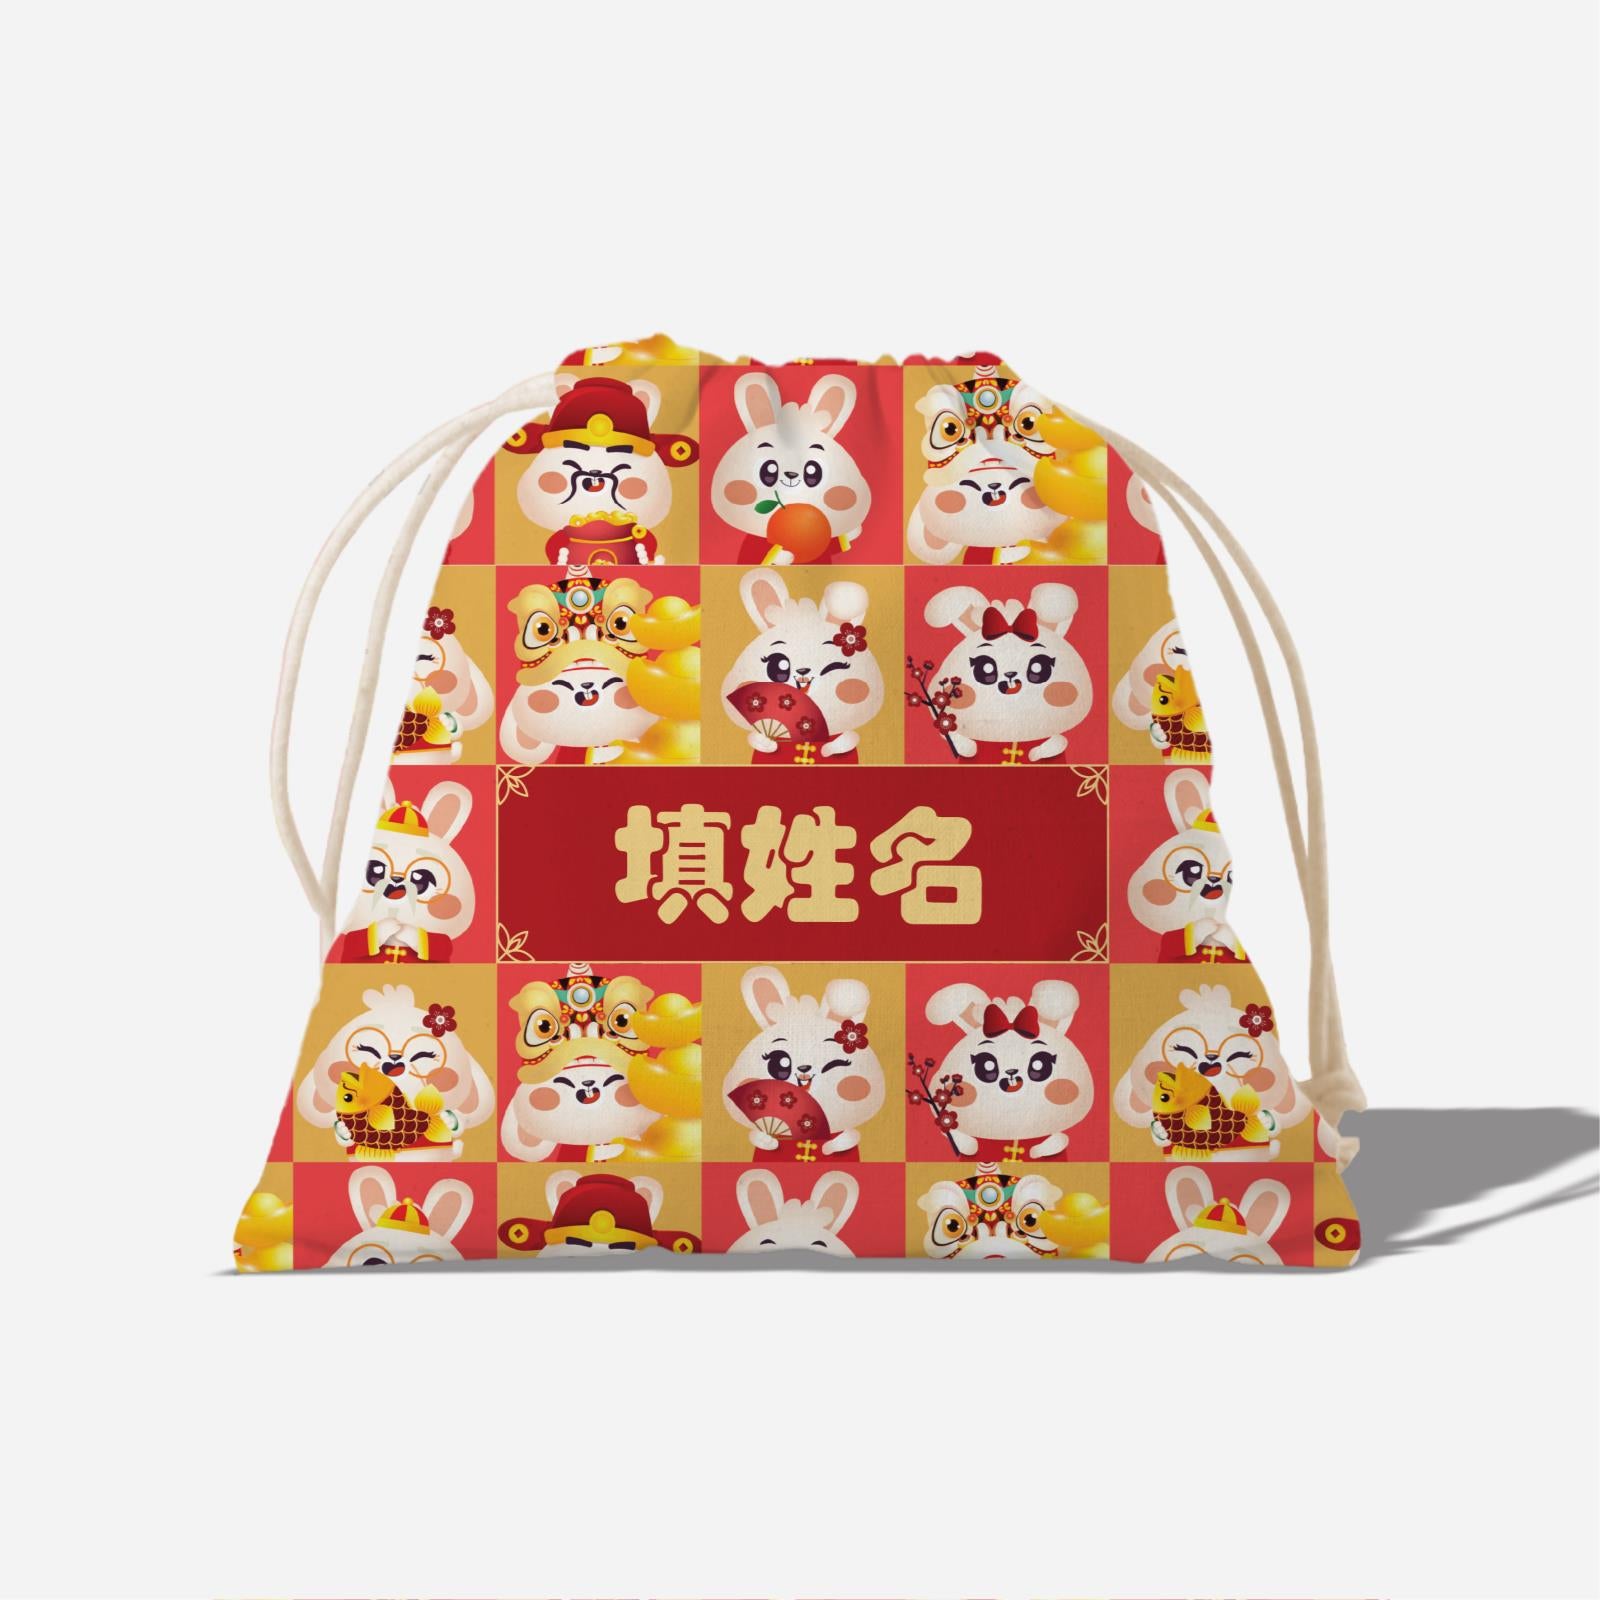 Cny Rabbit Family - Rabbit Family Red Full Print Satchel With Chinese Personalization